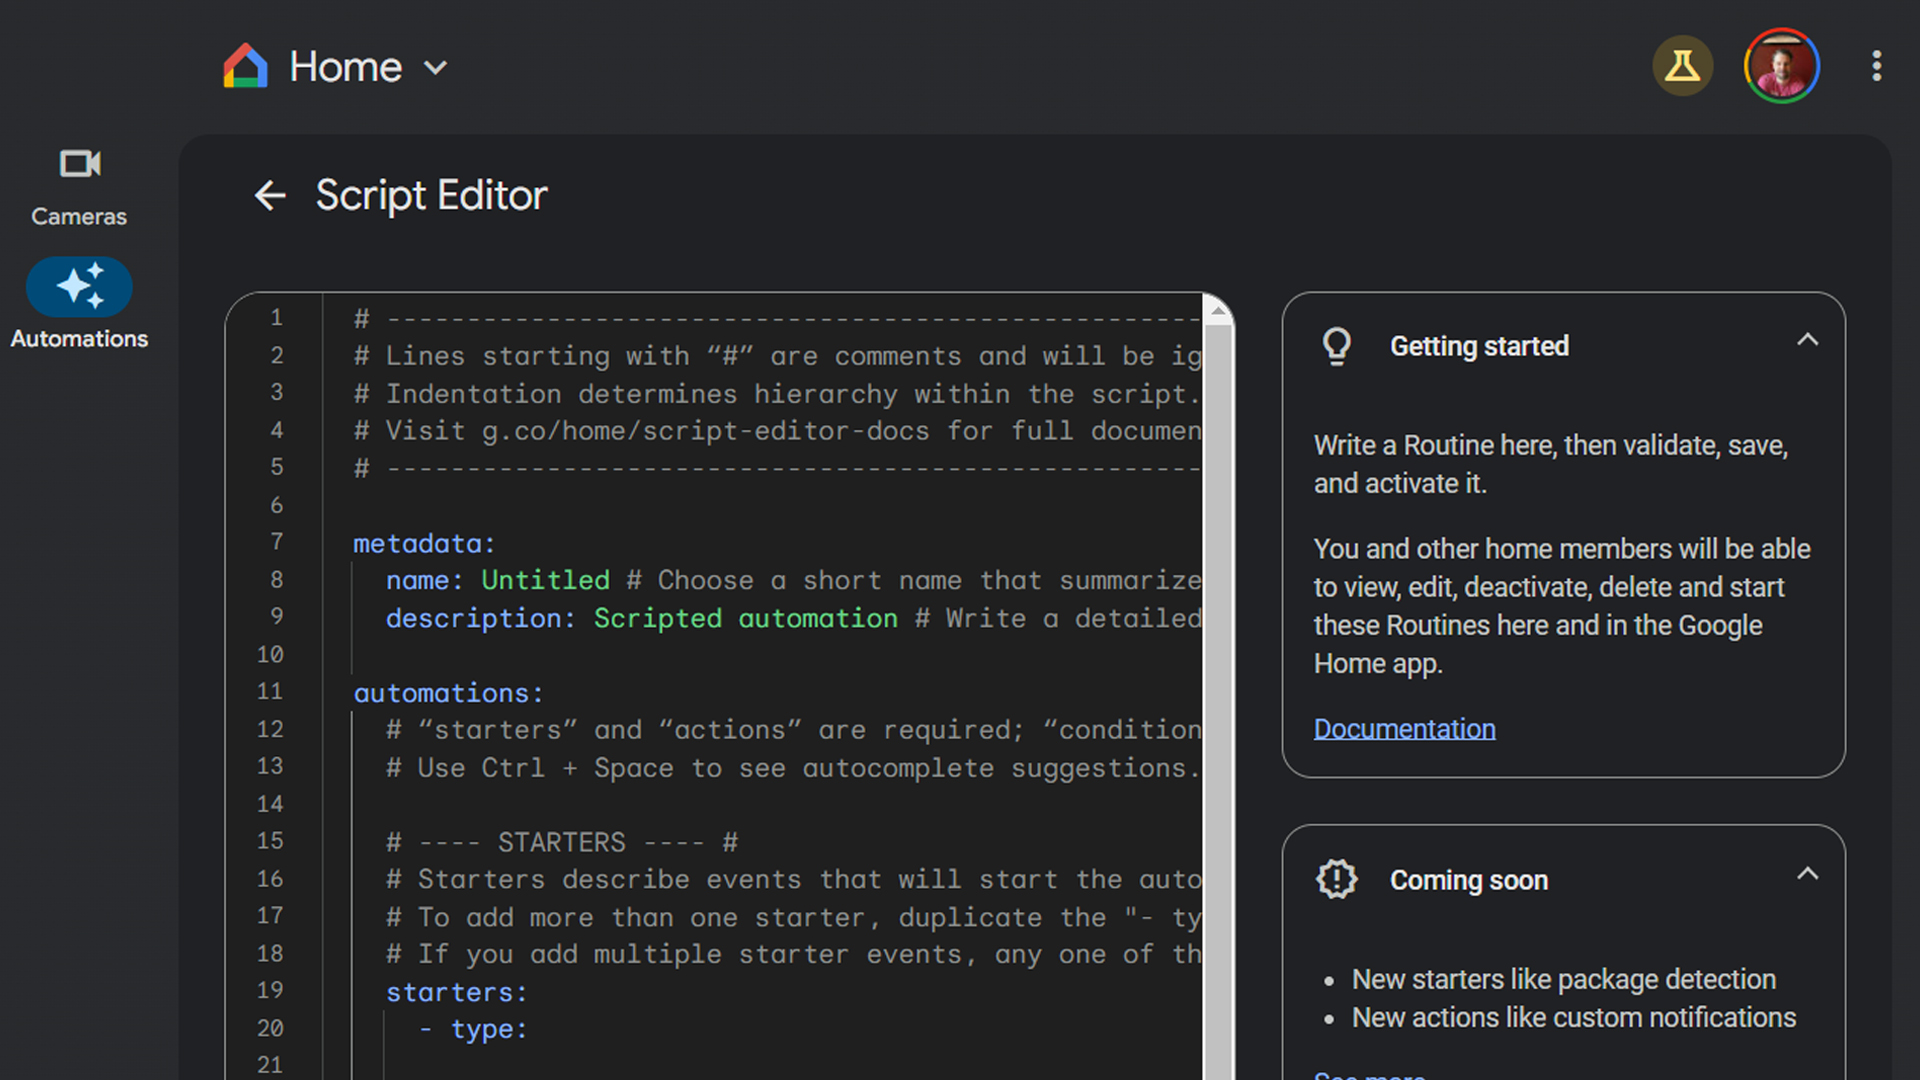 The Google Home script editor on the web